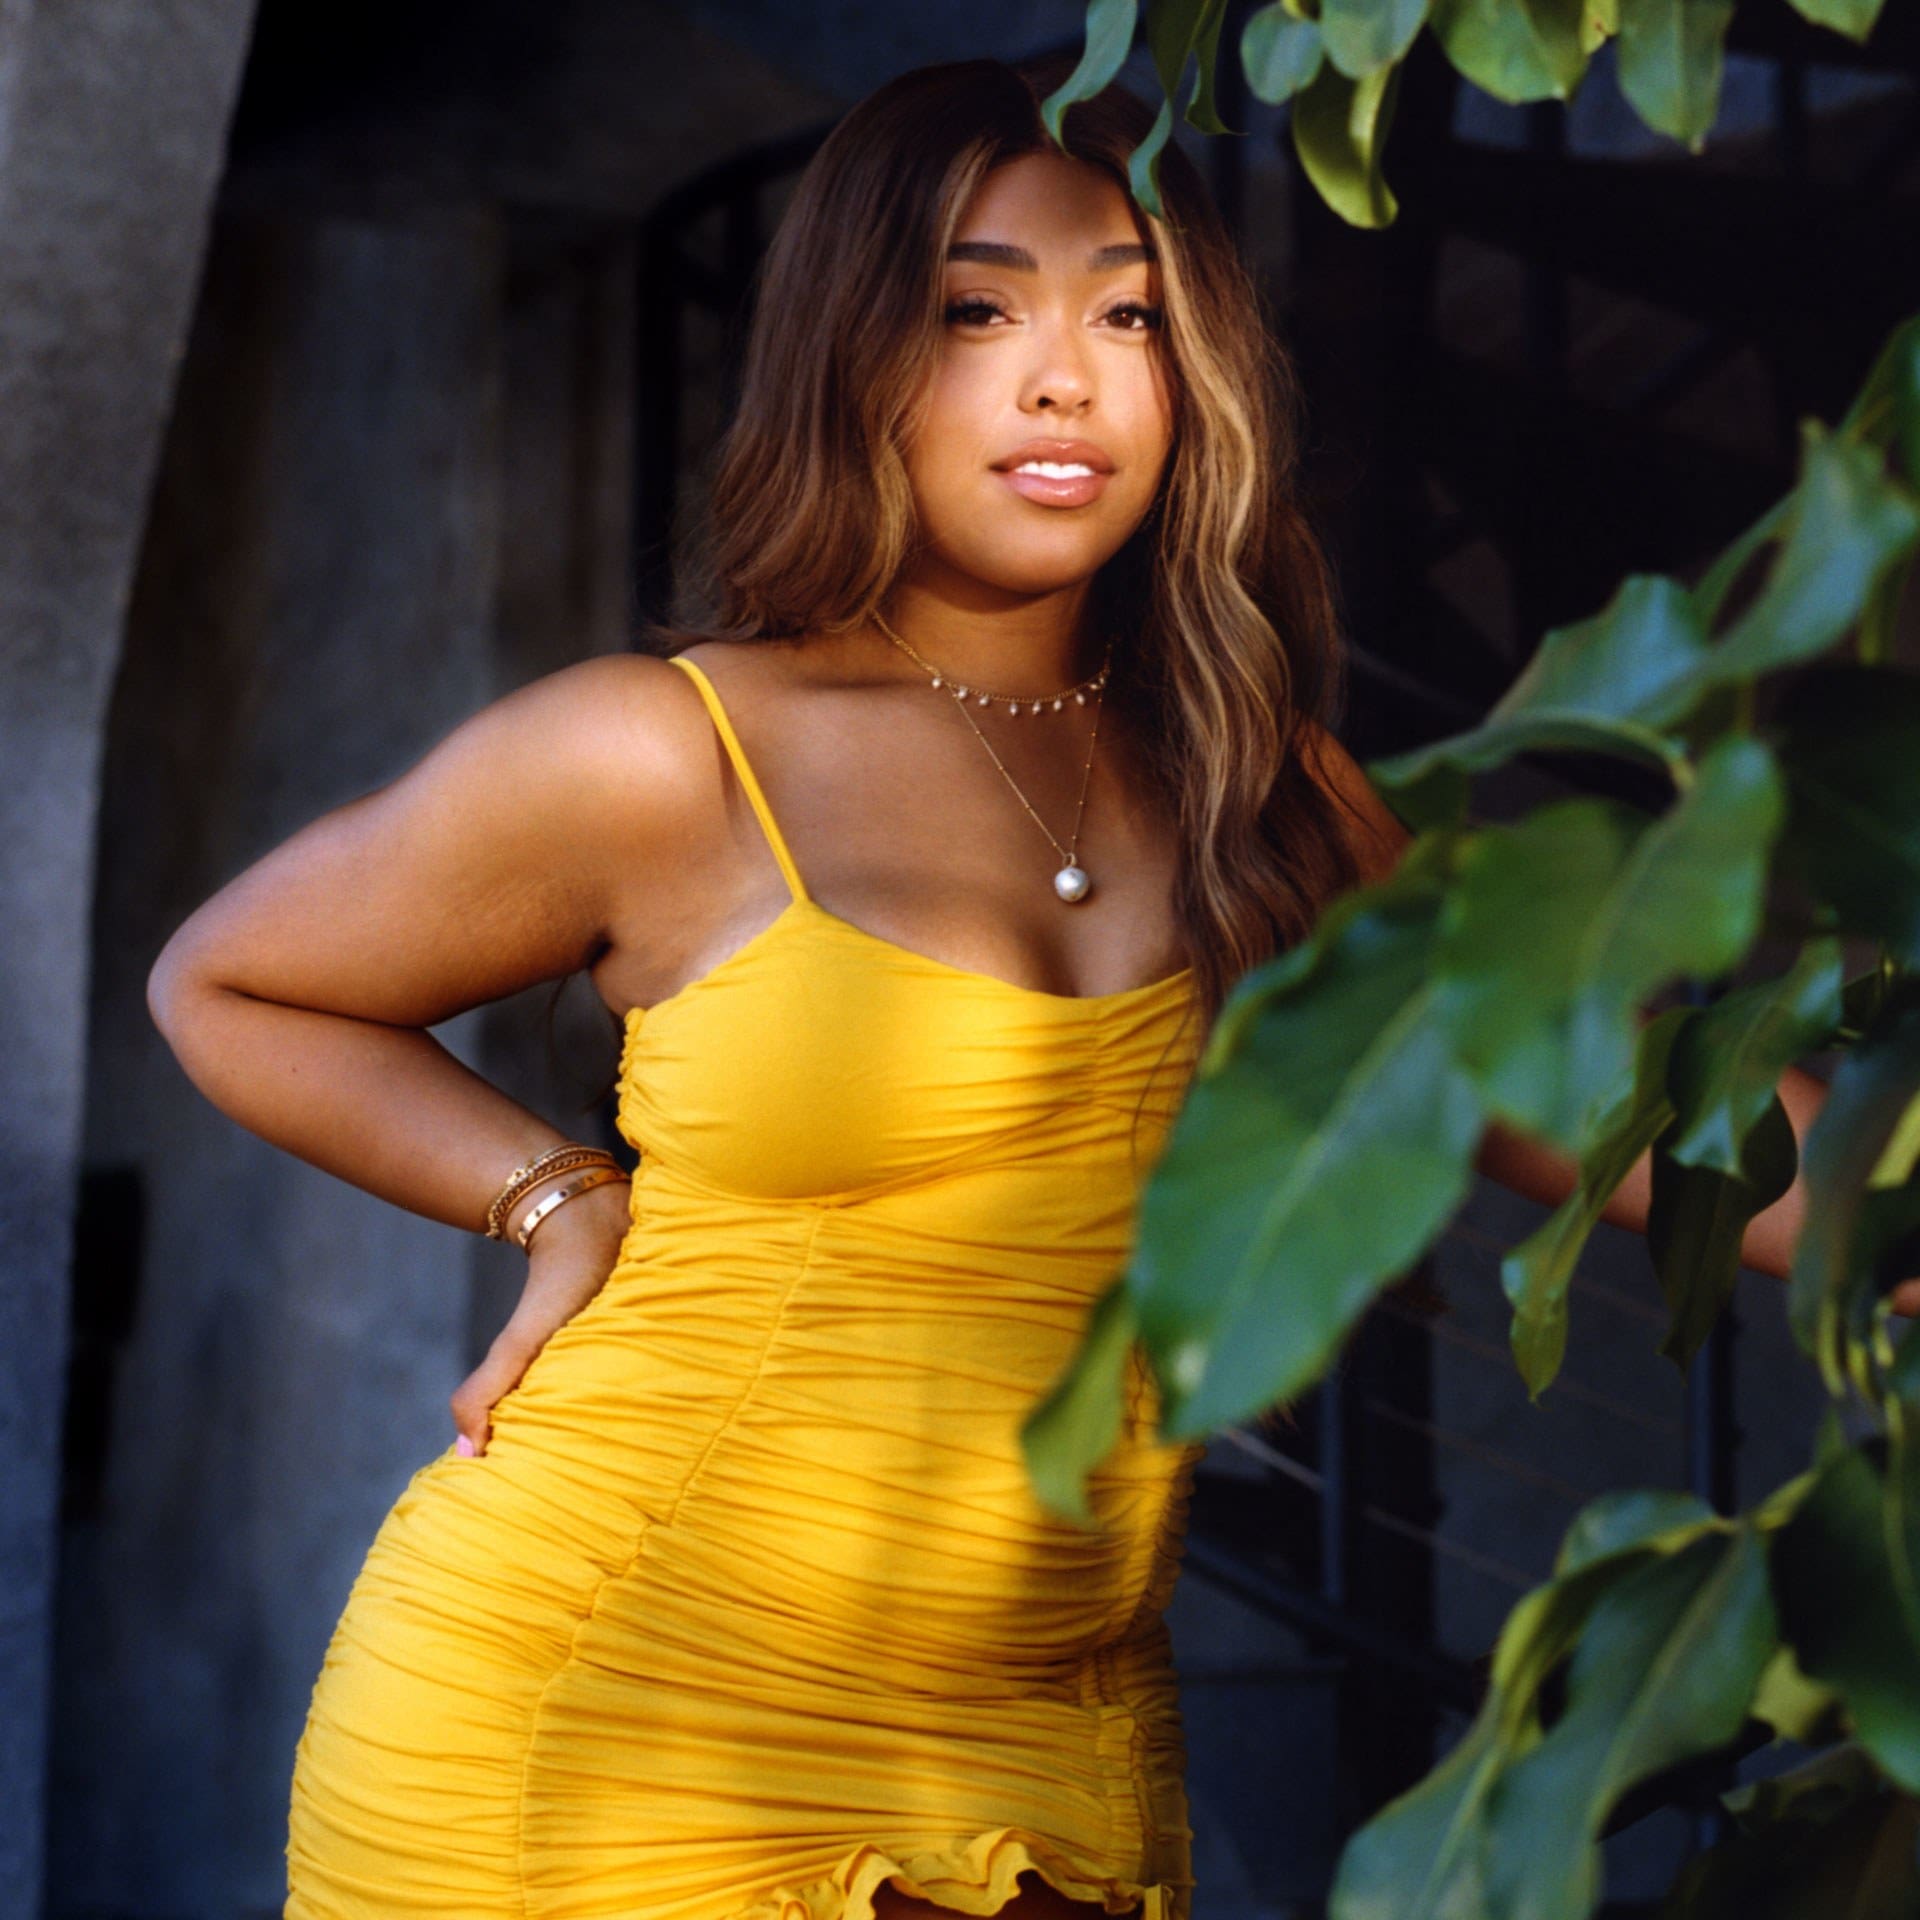 Jordyn Woods Shares Jaw-Dropping New Pics And Fans Praise Her Figure